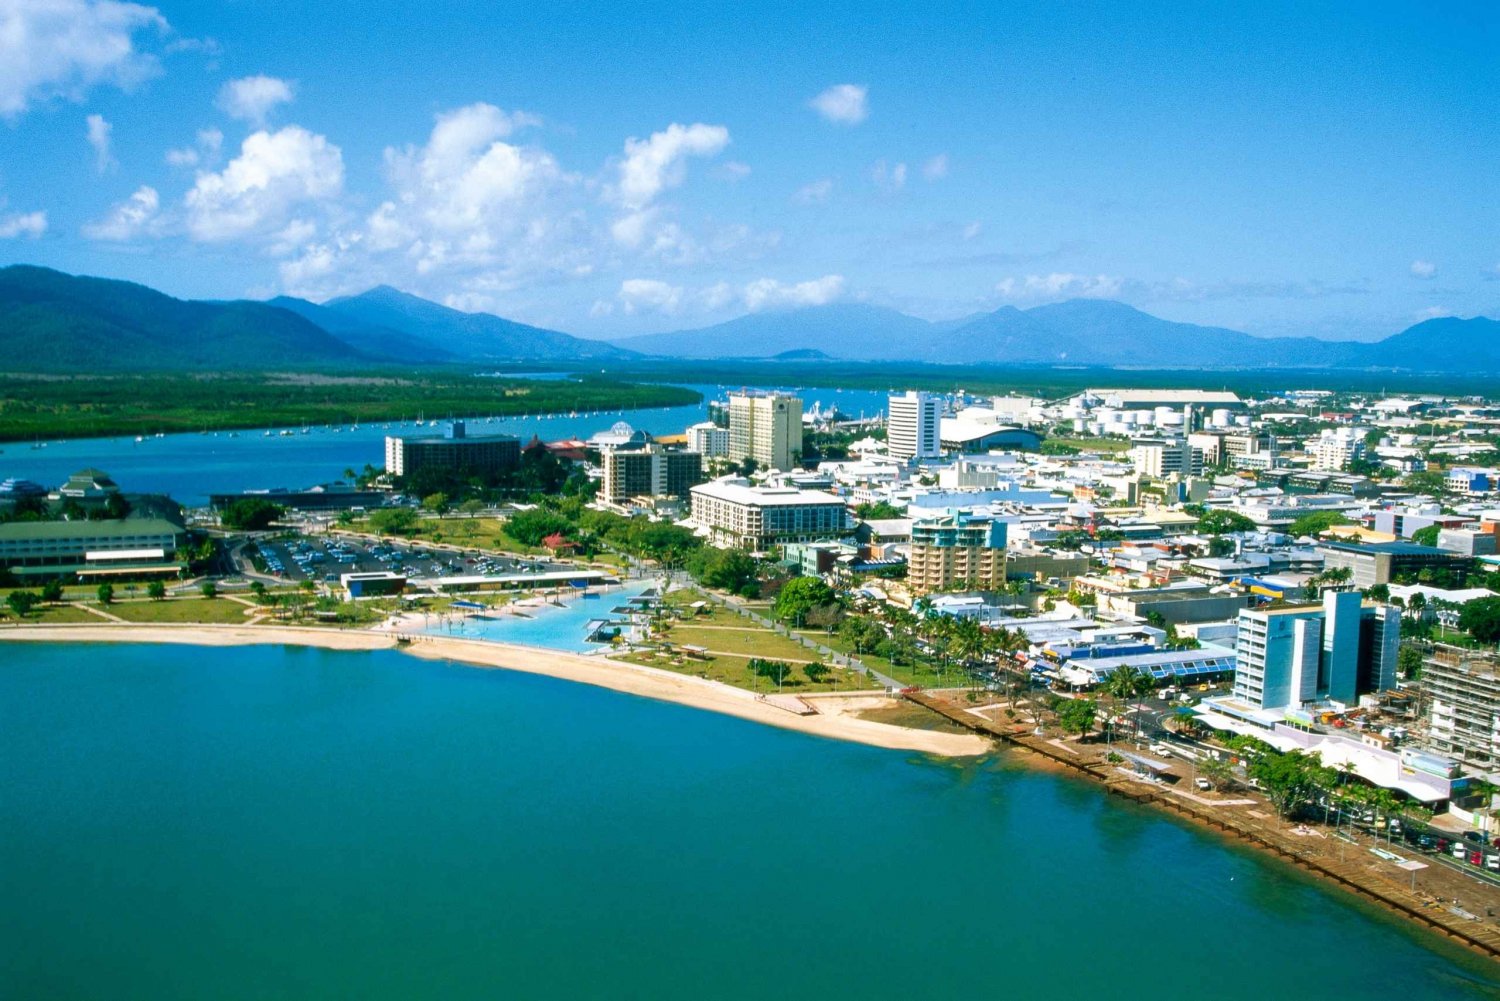 Cairns: Half-Day City Sightseeing Tour